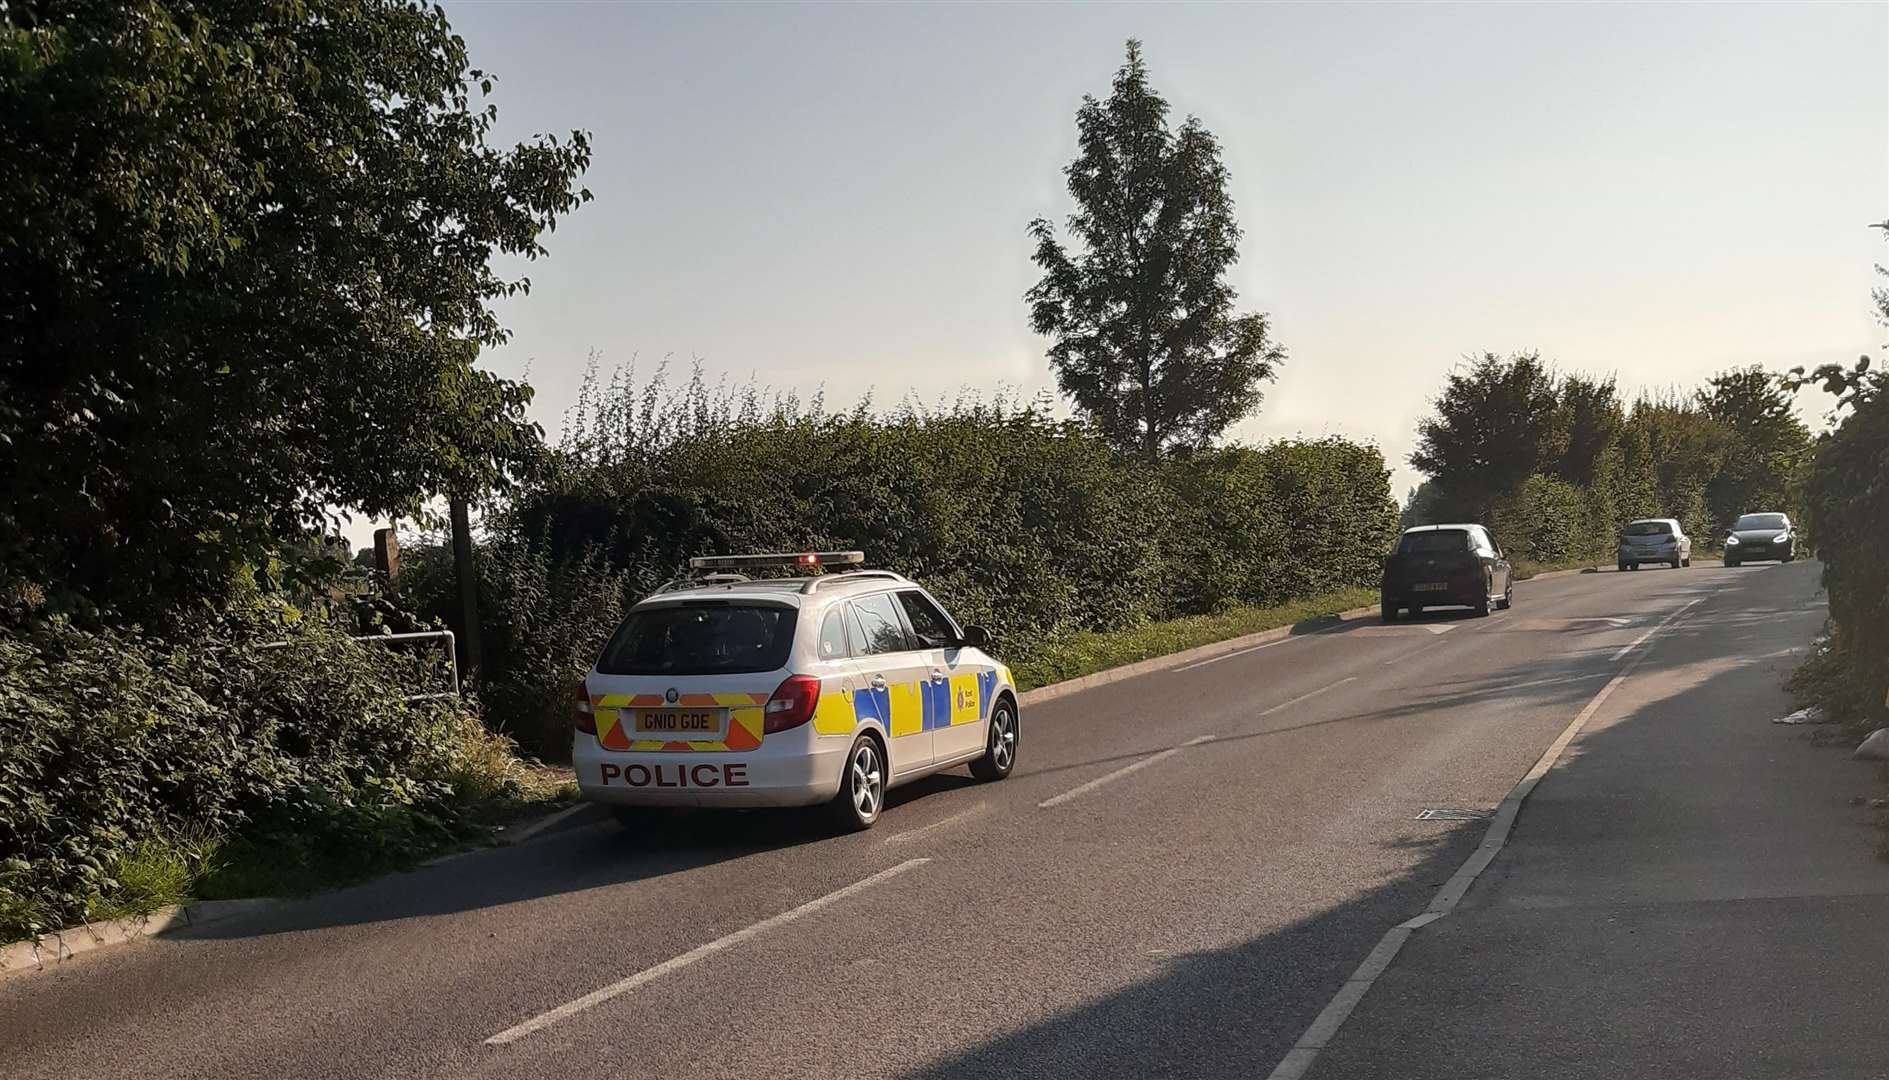 Police at a footpath off Swanstree Avenue, Sittingbourne, which leads to orchards in Highsted Road